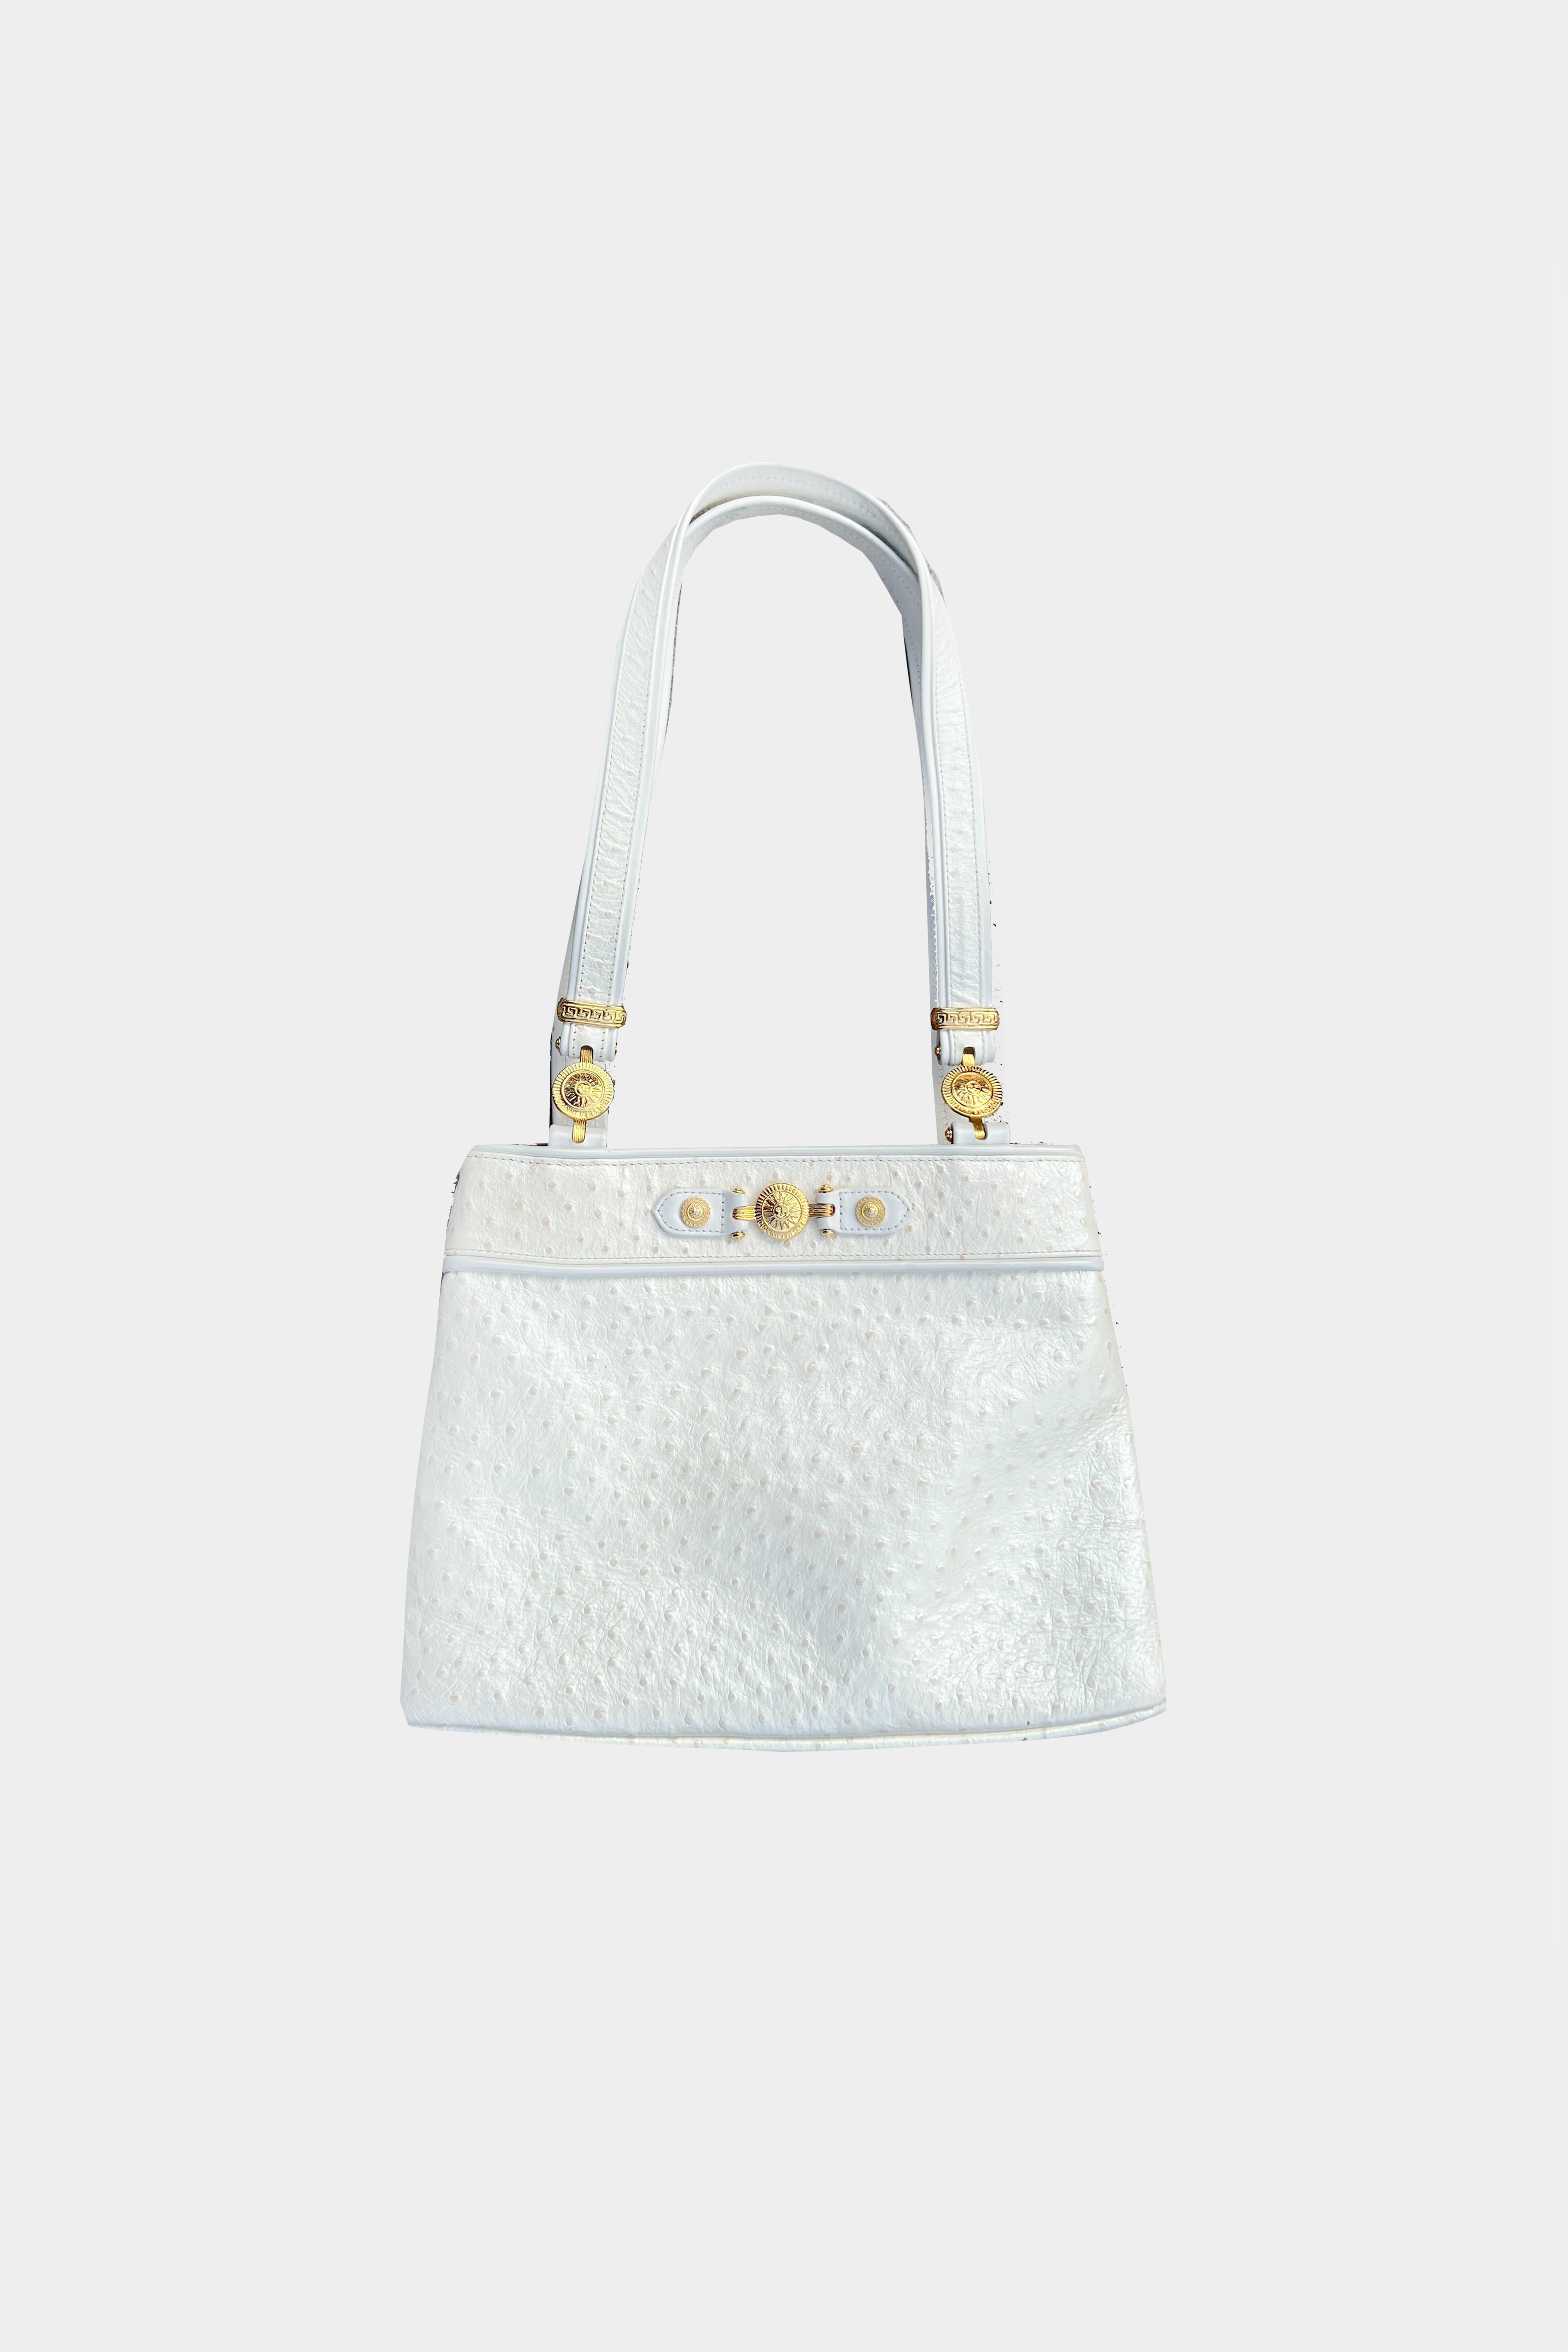 Gianni Versace 2000s Ostrich White Leather Tote Bag